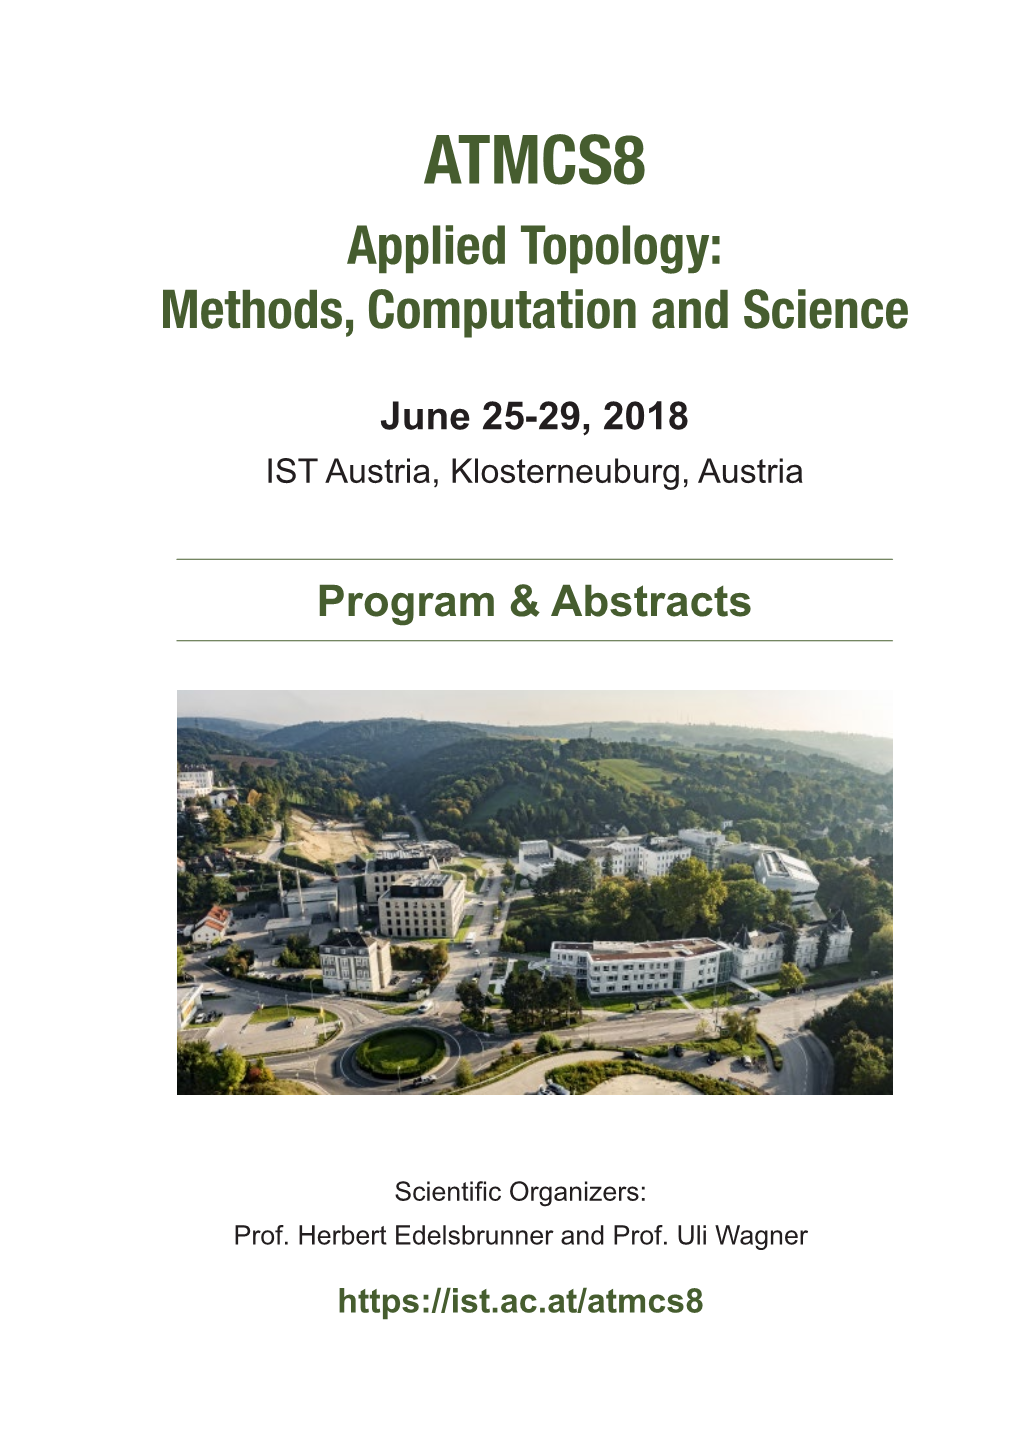 ATMCS8 Applied Topology: Methods, Computation and Science